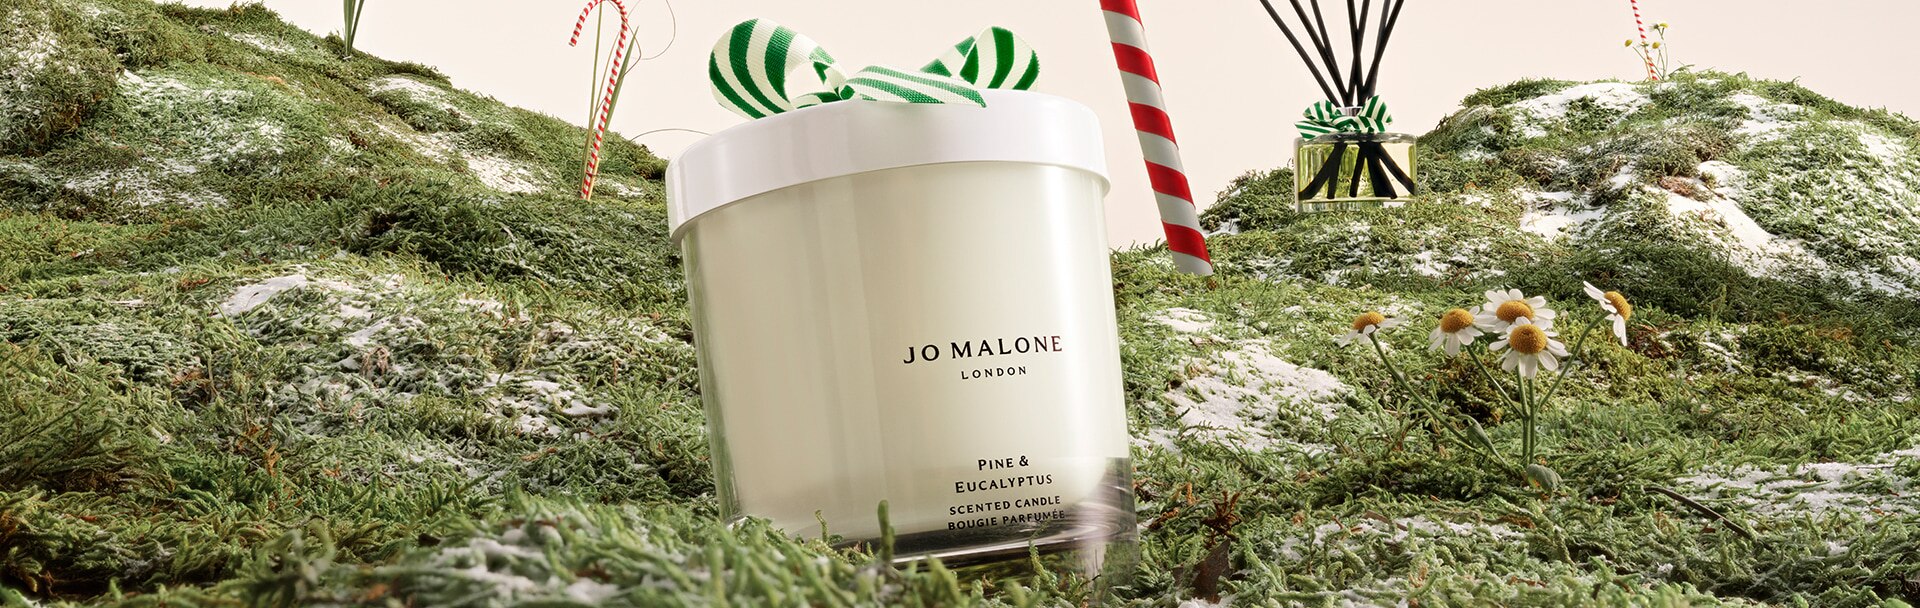 pine & eucalyptus home candle & diffuser, amongst snowballs and on a bed of moss with candy canes